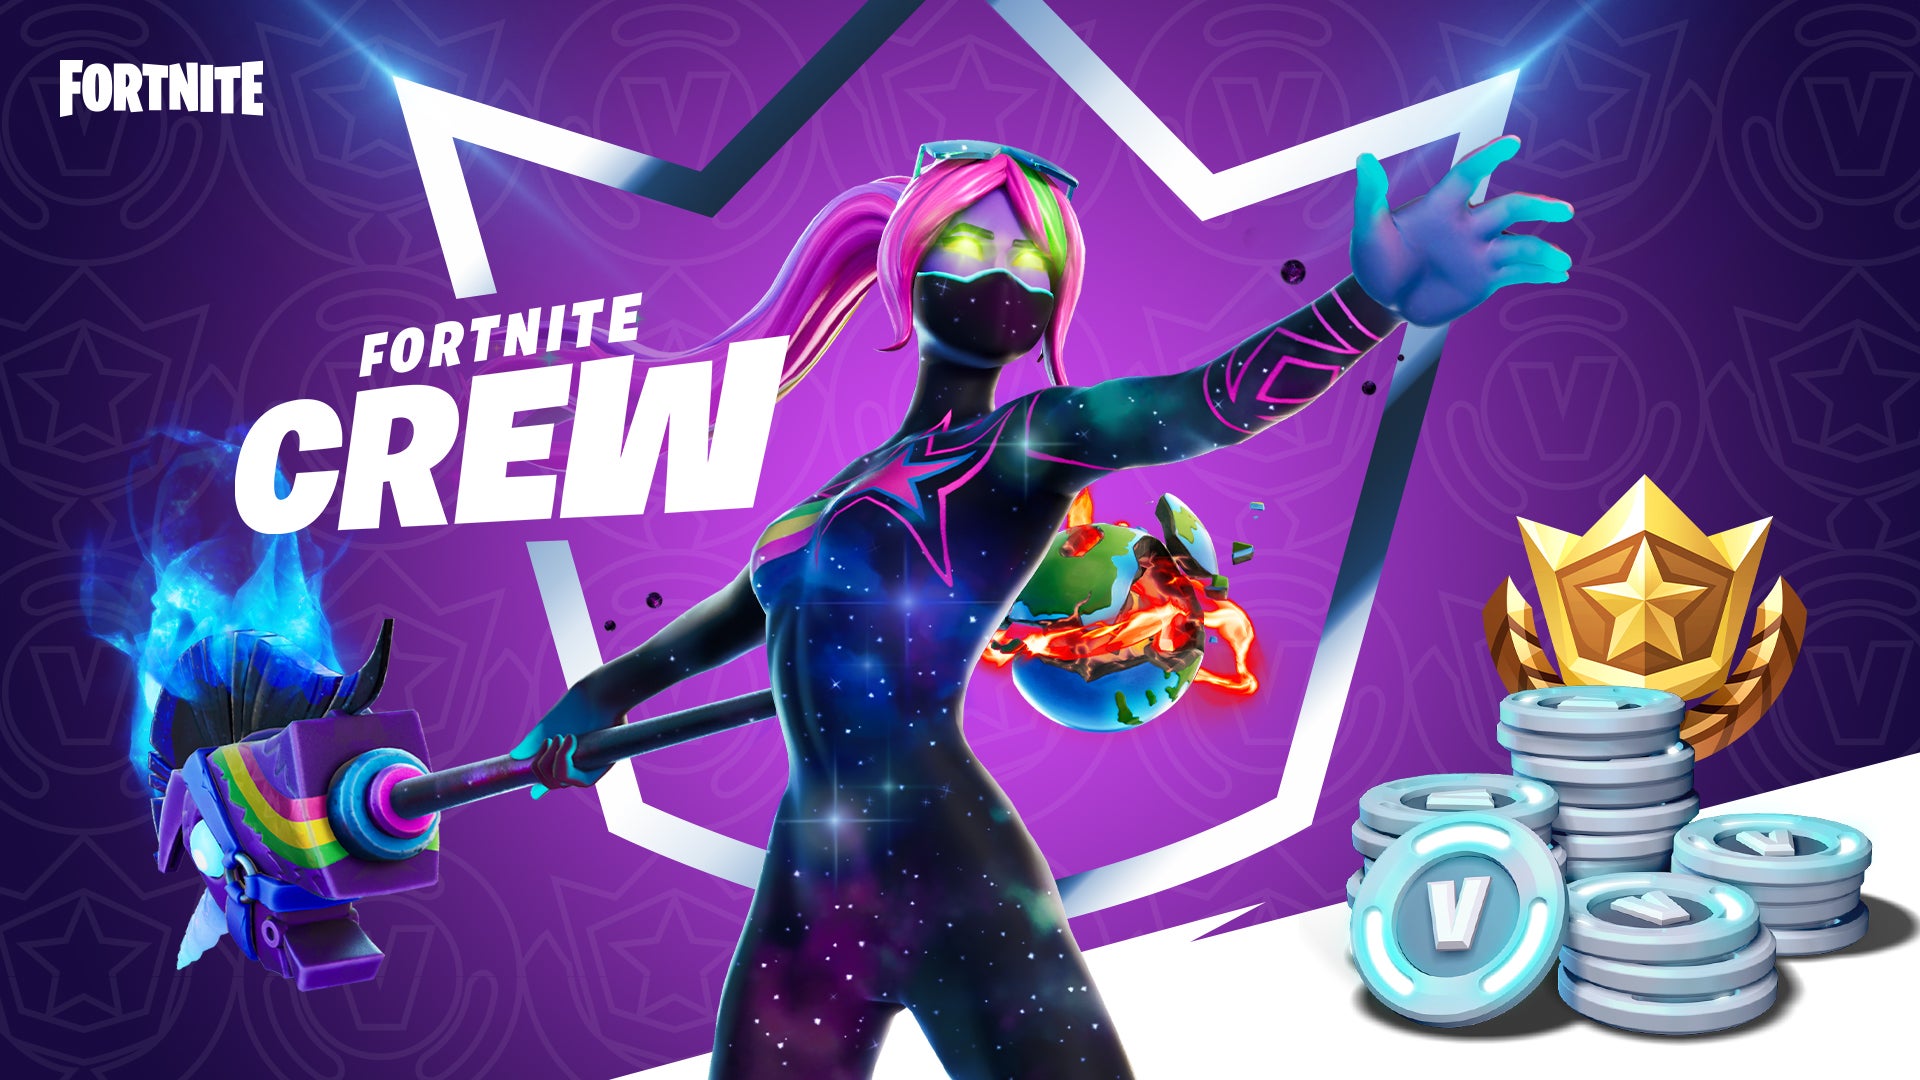 Image for Fortnite Crew monthly subscription service launches alongside Season 5 with exclusive Crew Outfit Pack